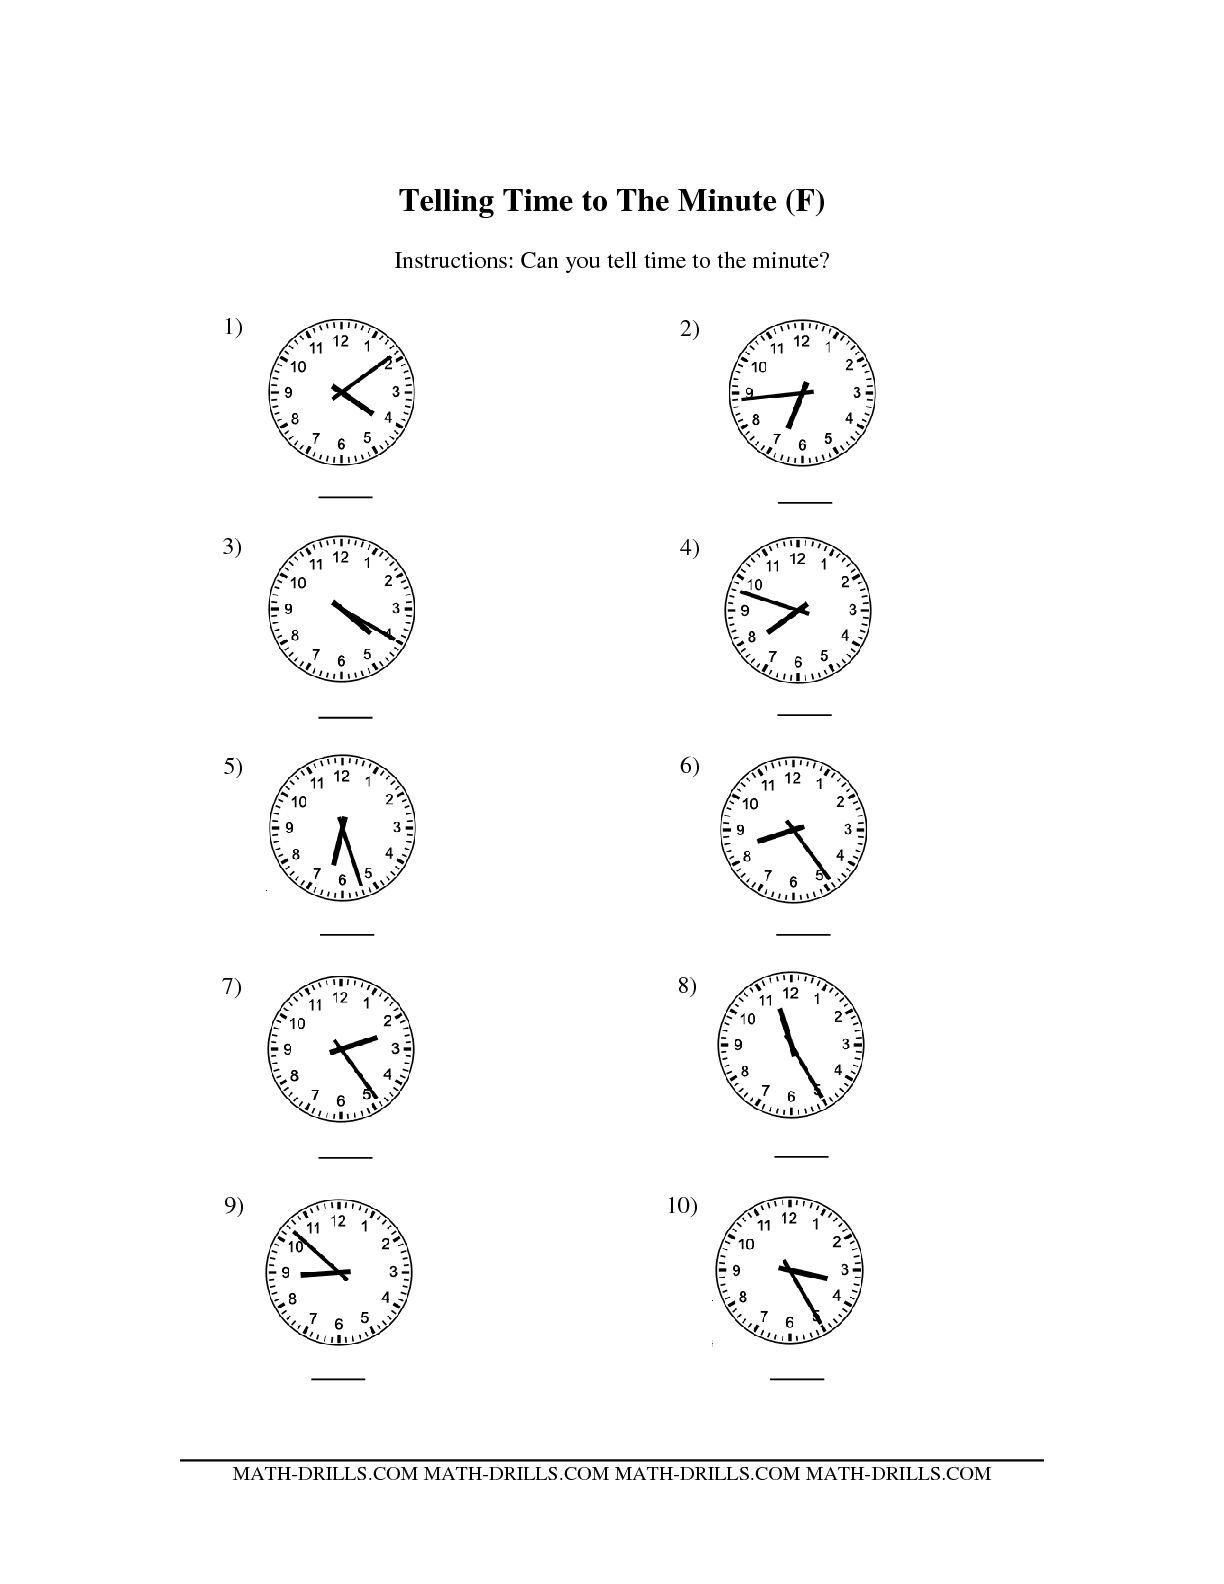 Analog Clock Telling Time to Minute On Image